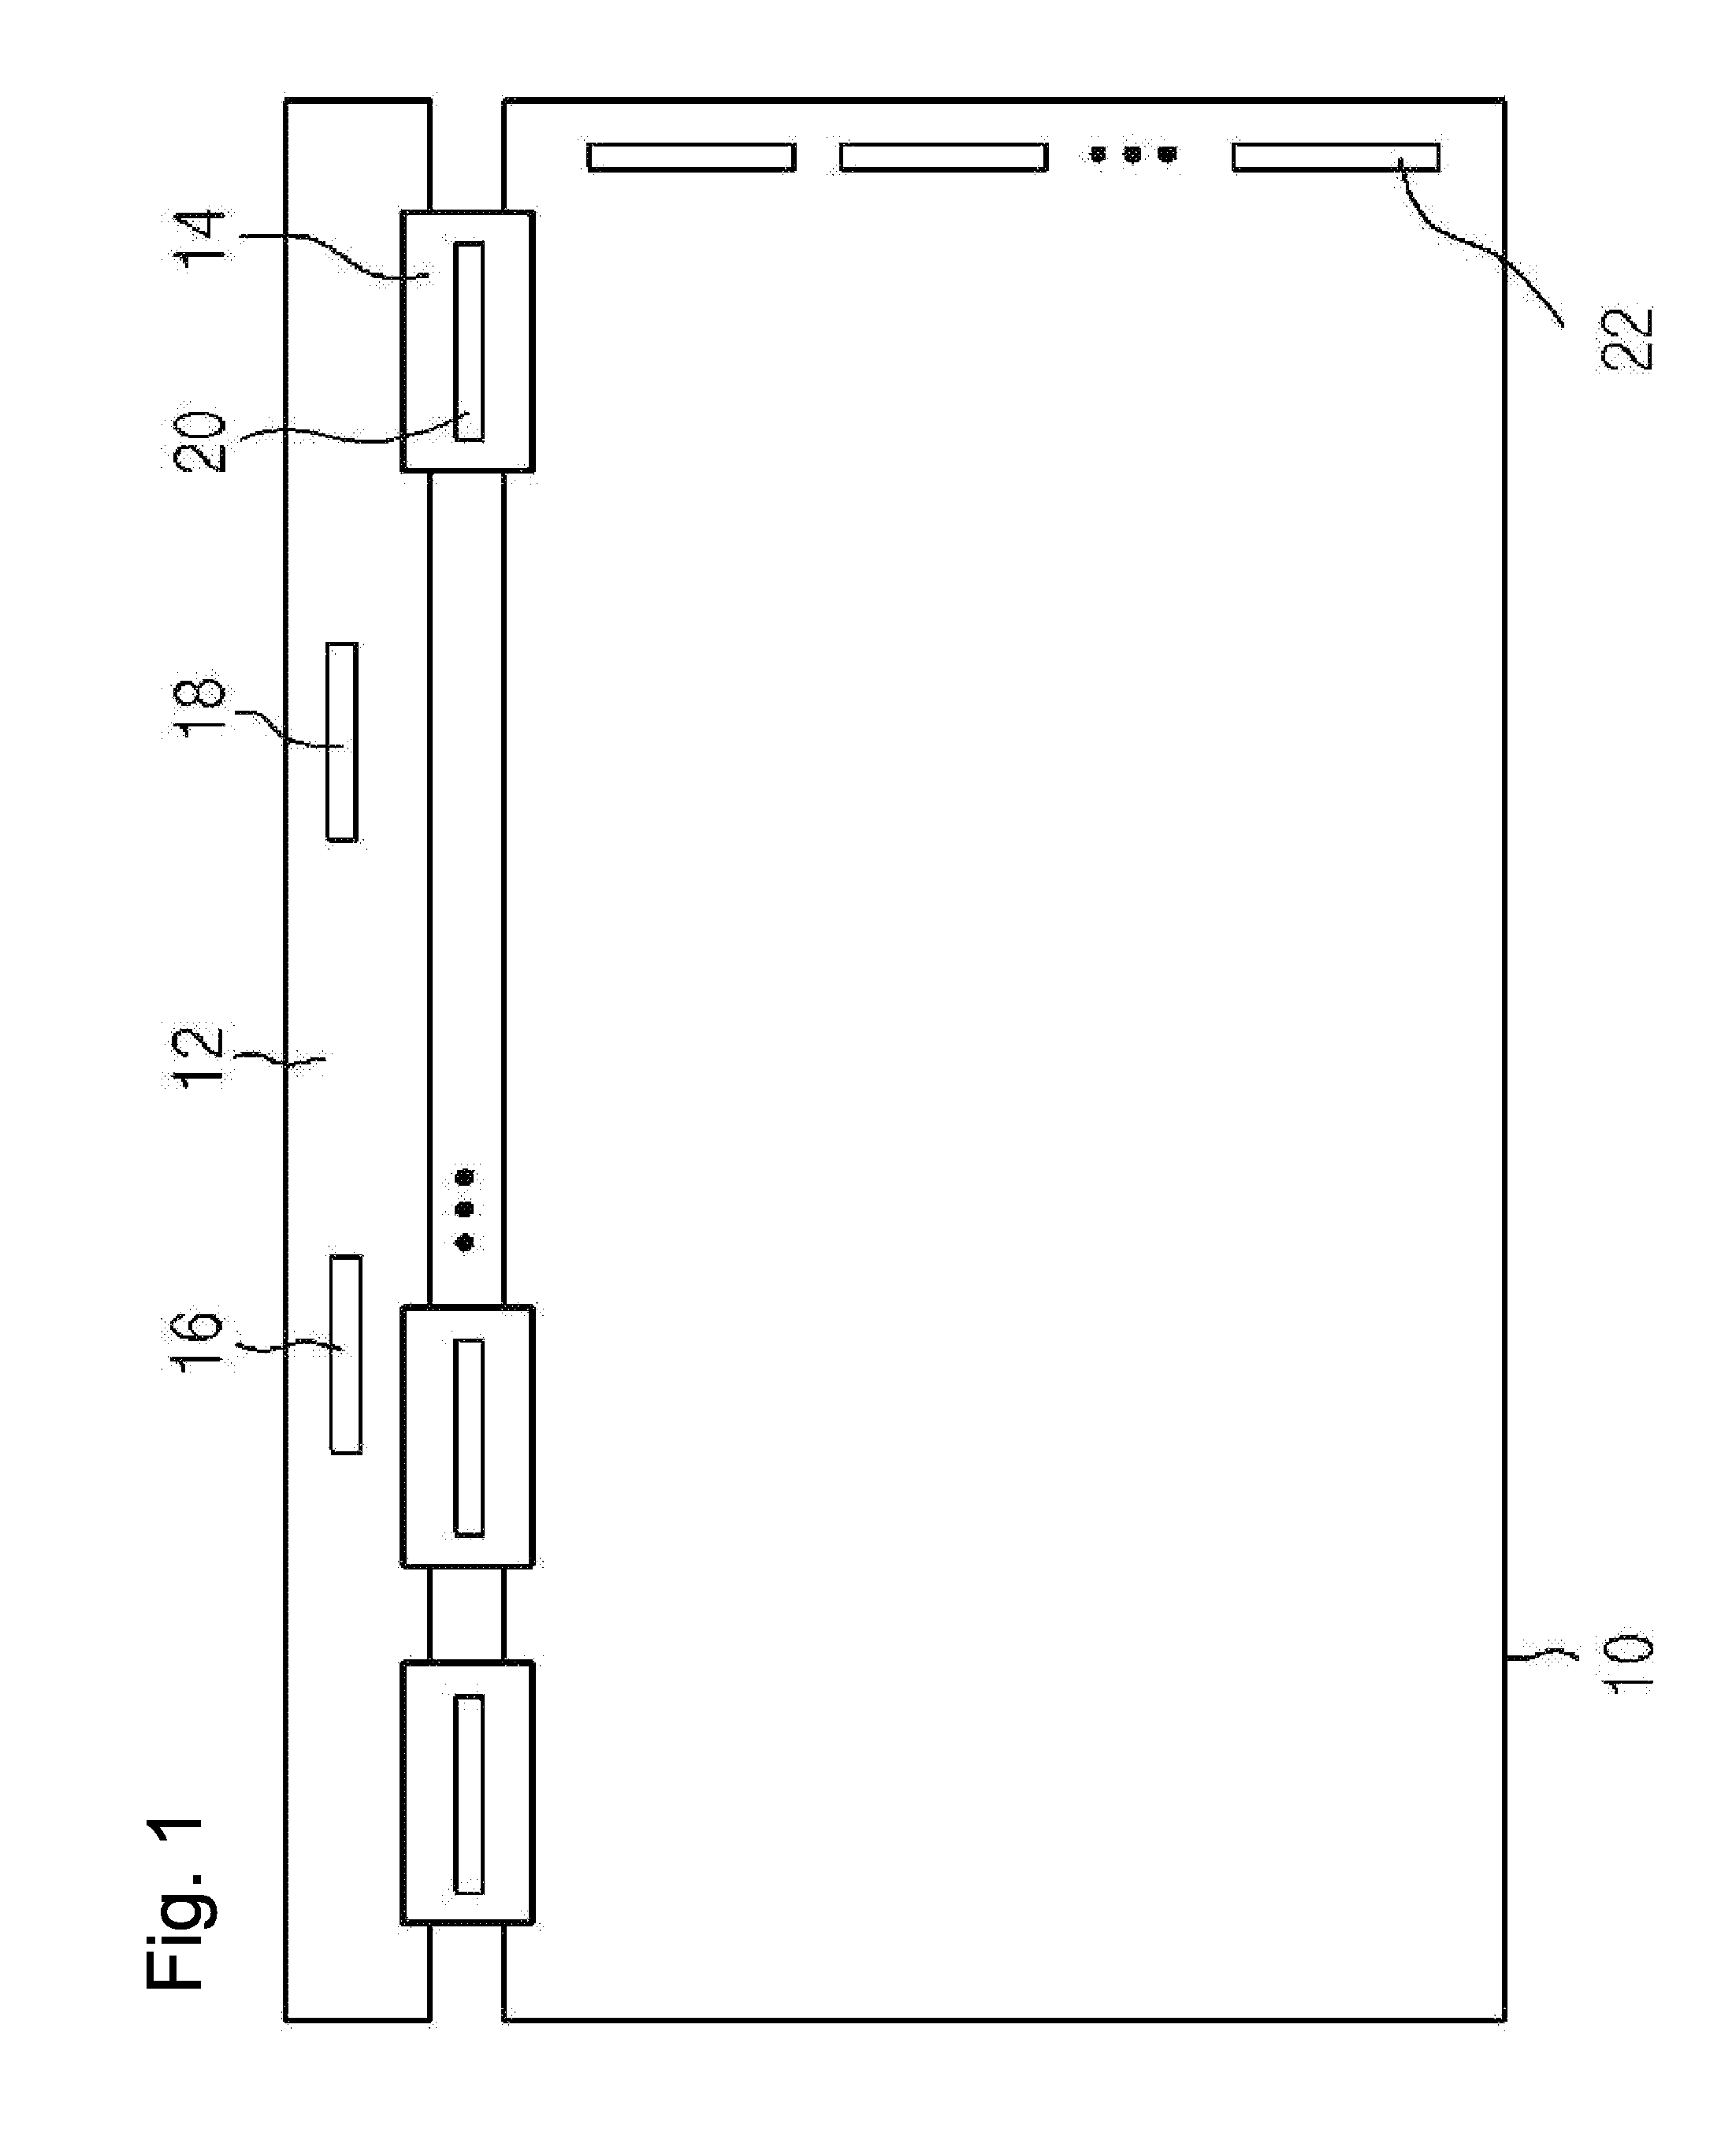 Source driver for display apparatus